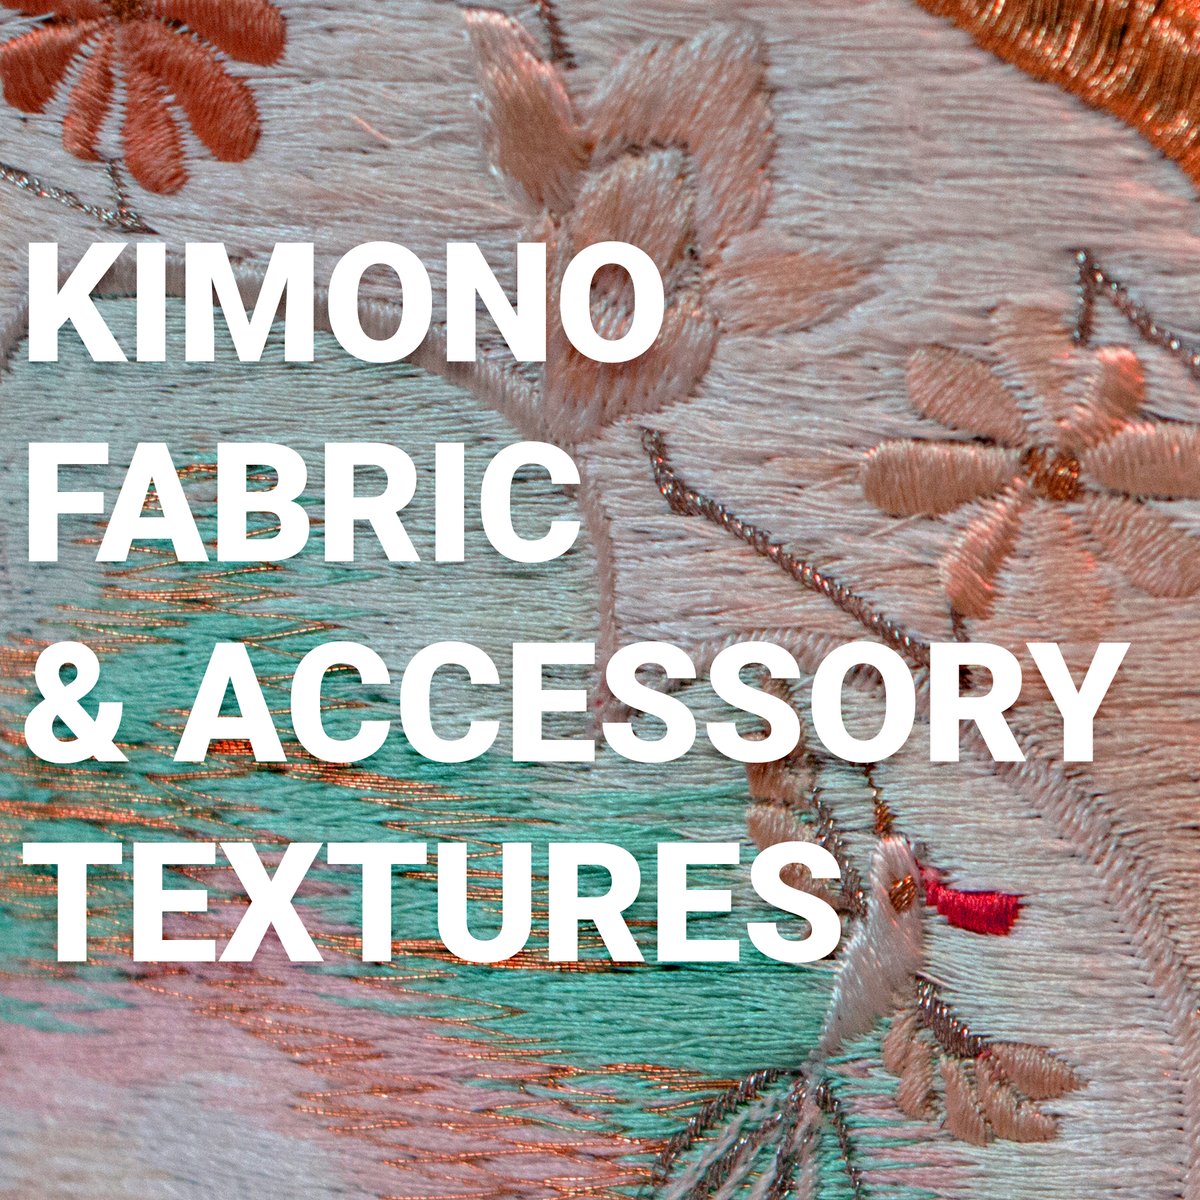 Its been a while since my last fabric release & this time around I focused on Kimono styling, fabrics and accessories. This set contains 200 hi res photos free to use as textures for paintings or reference etc. you can grab it here:  https://t.co/DbvslbKv2t 